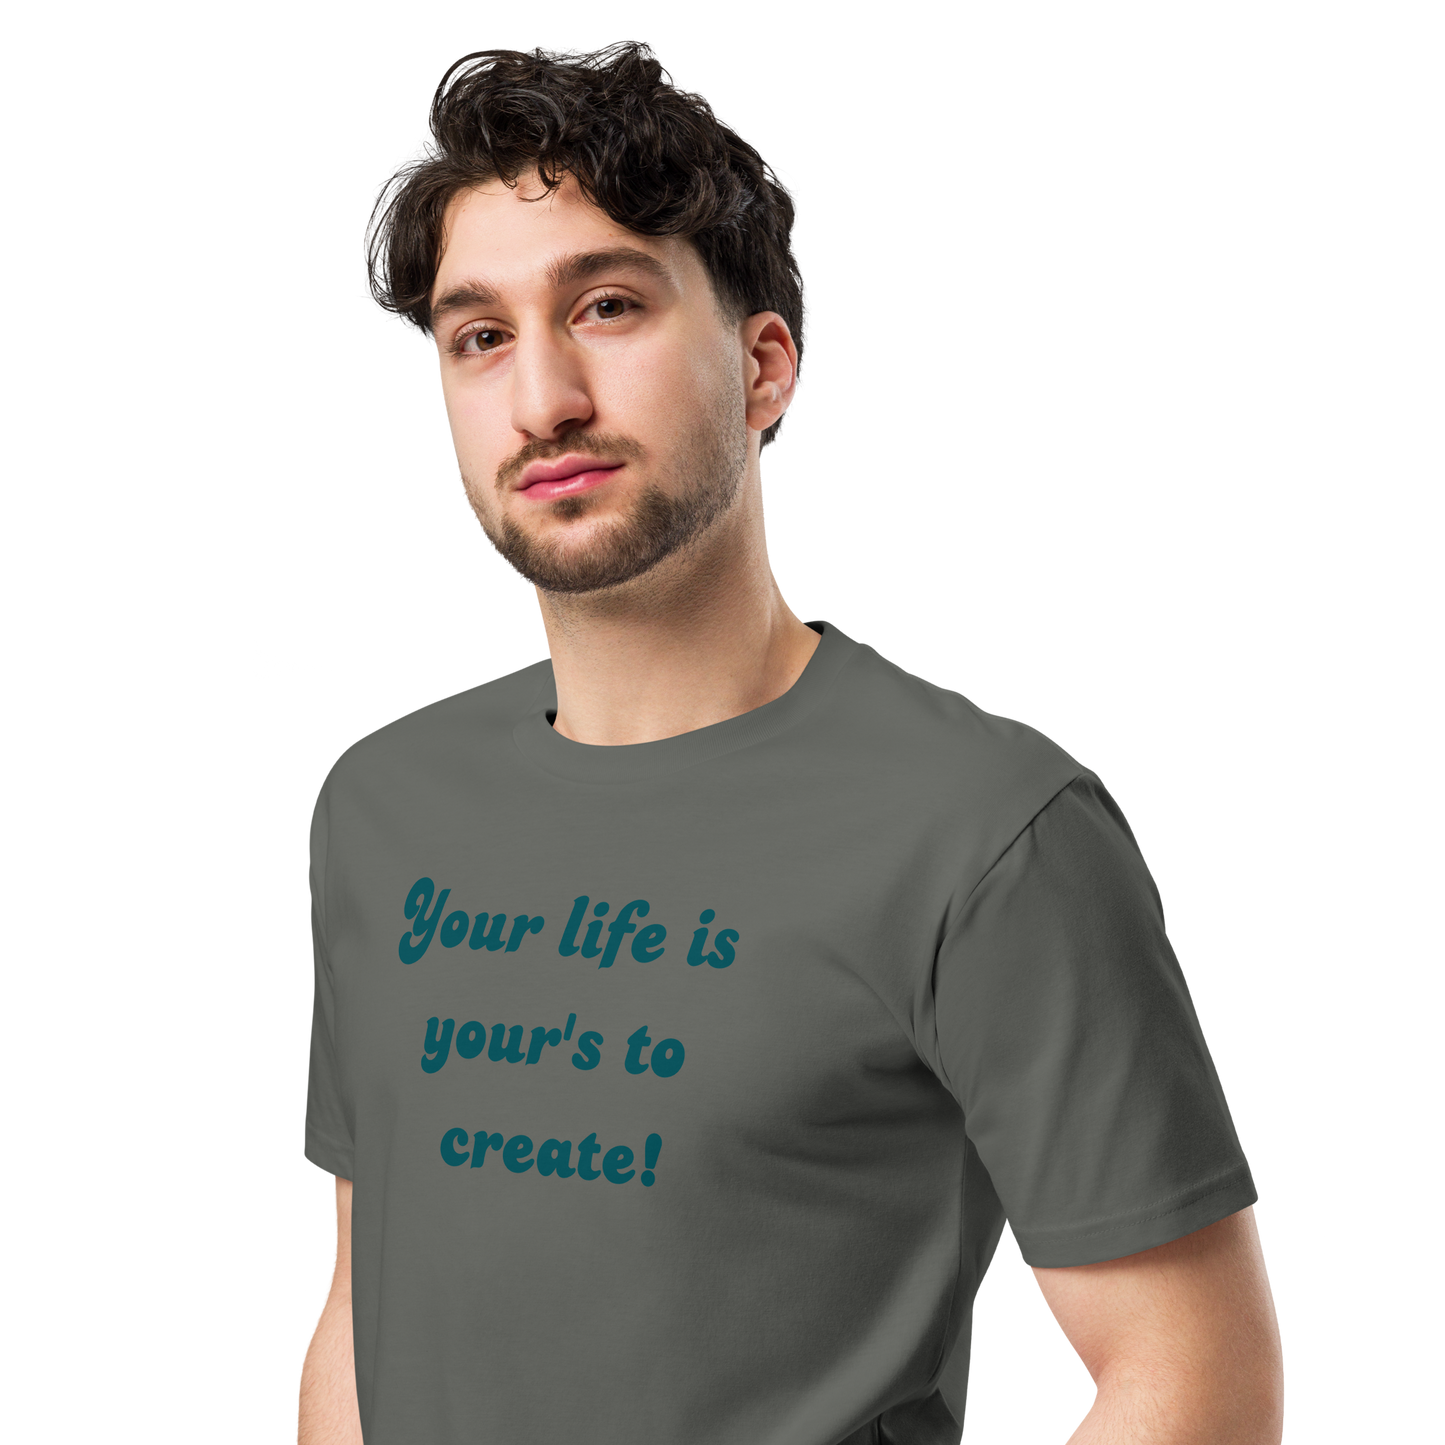 Create your own life t-shirt